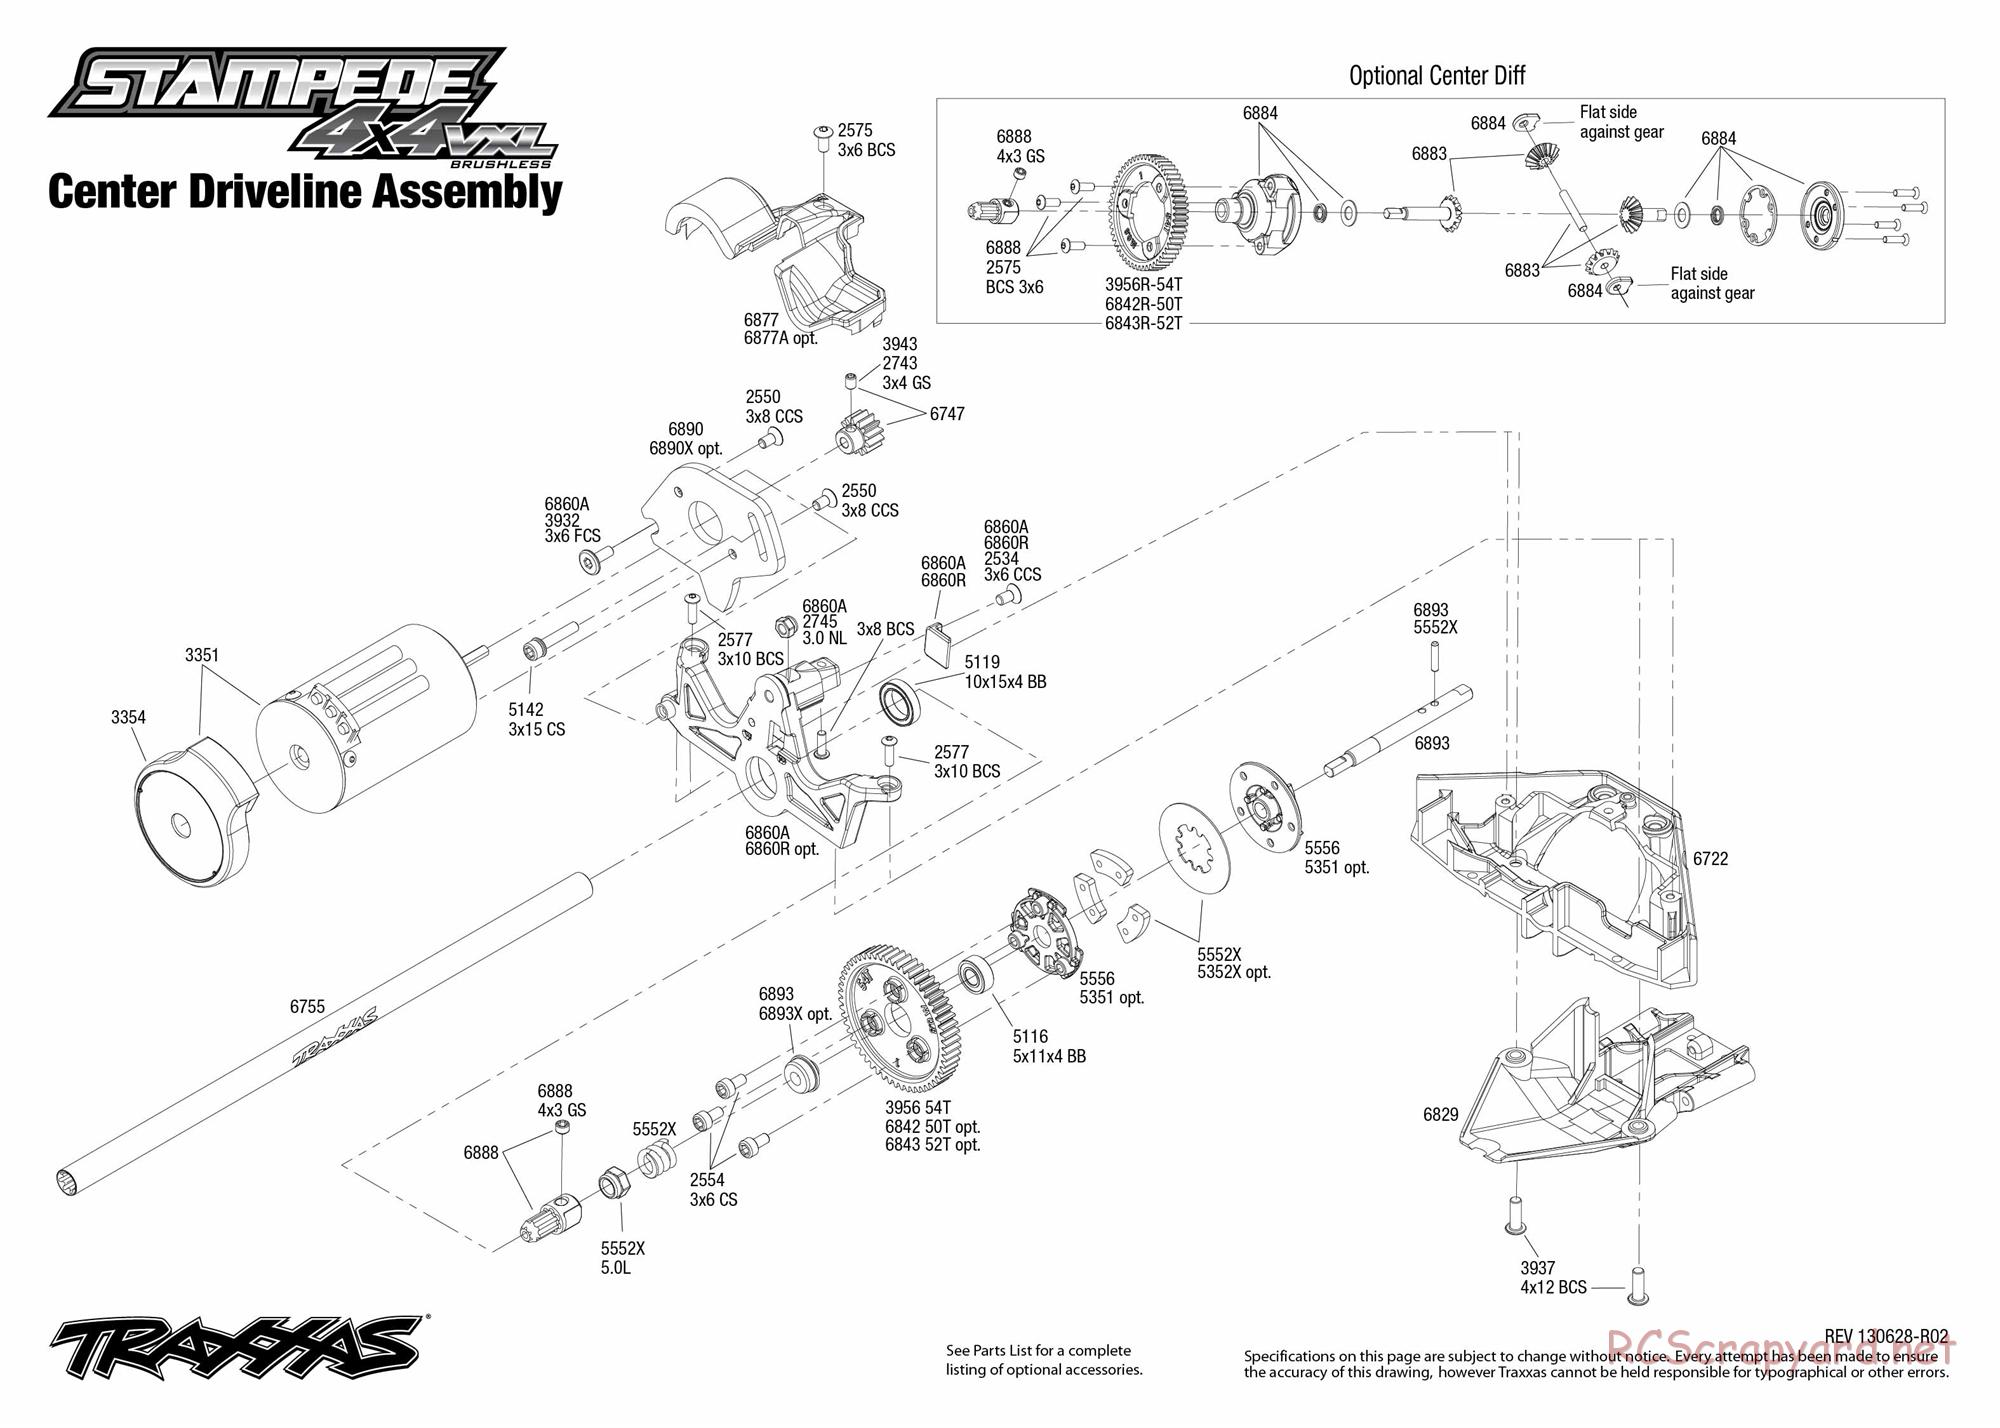 Traxxas - Stampede 4x4 VXL (2012) - Exploded Views - Page 5